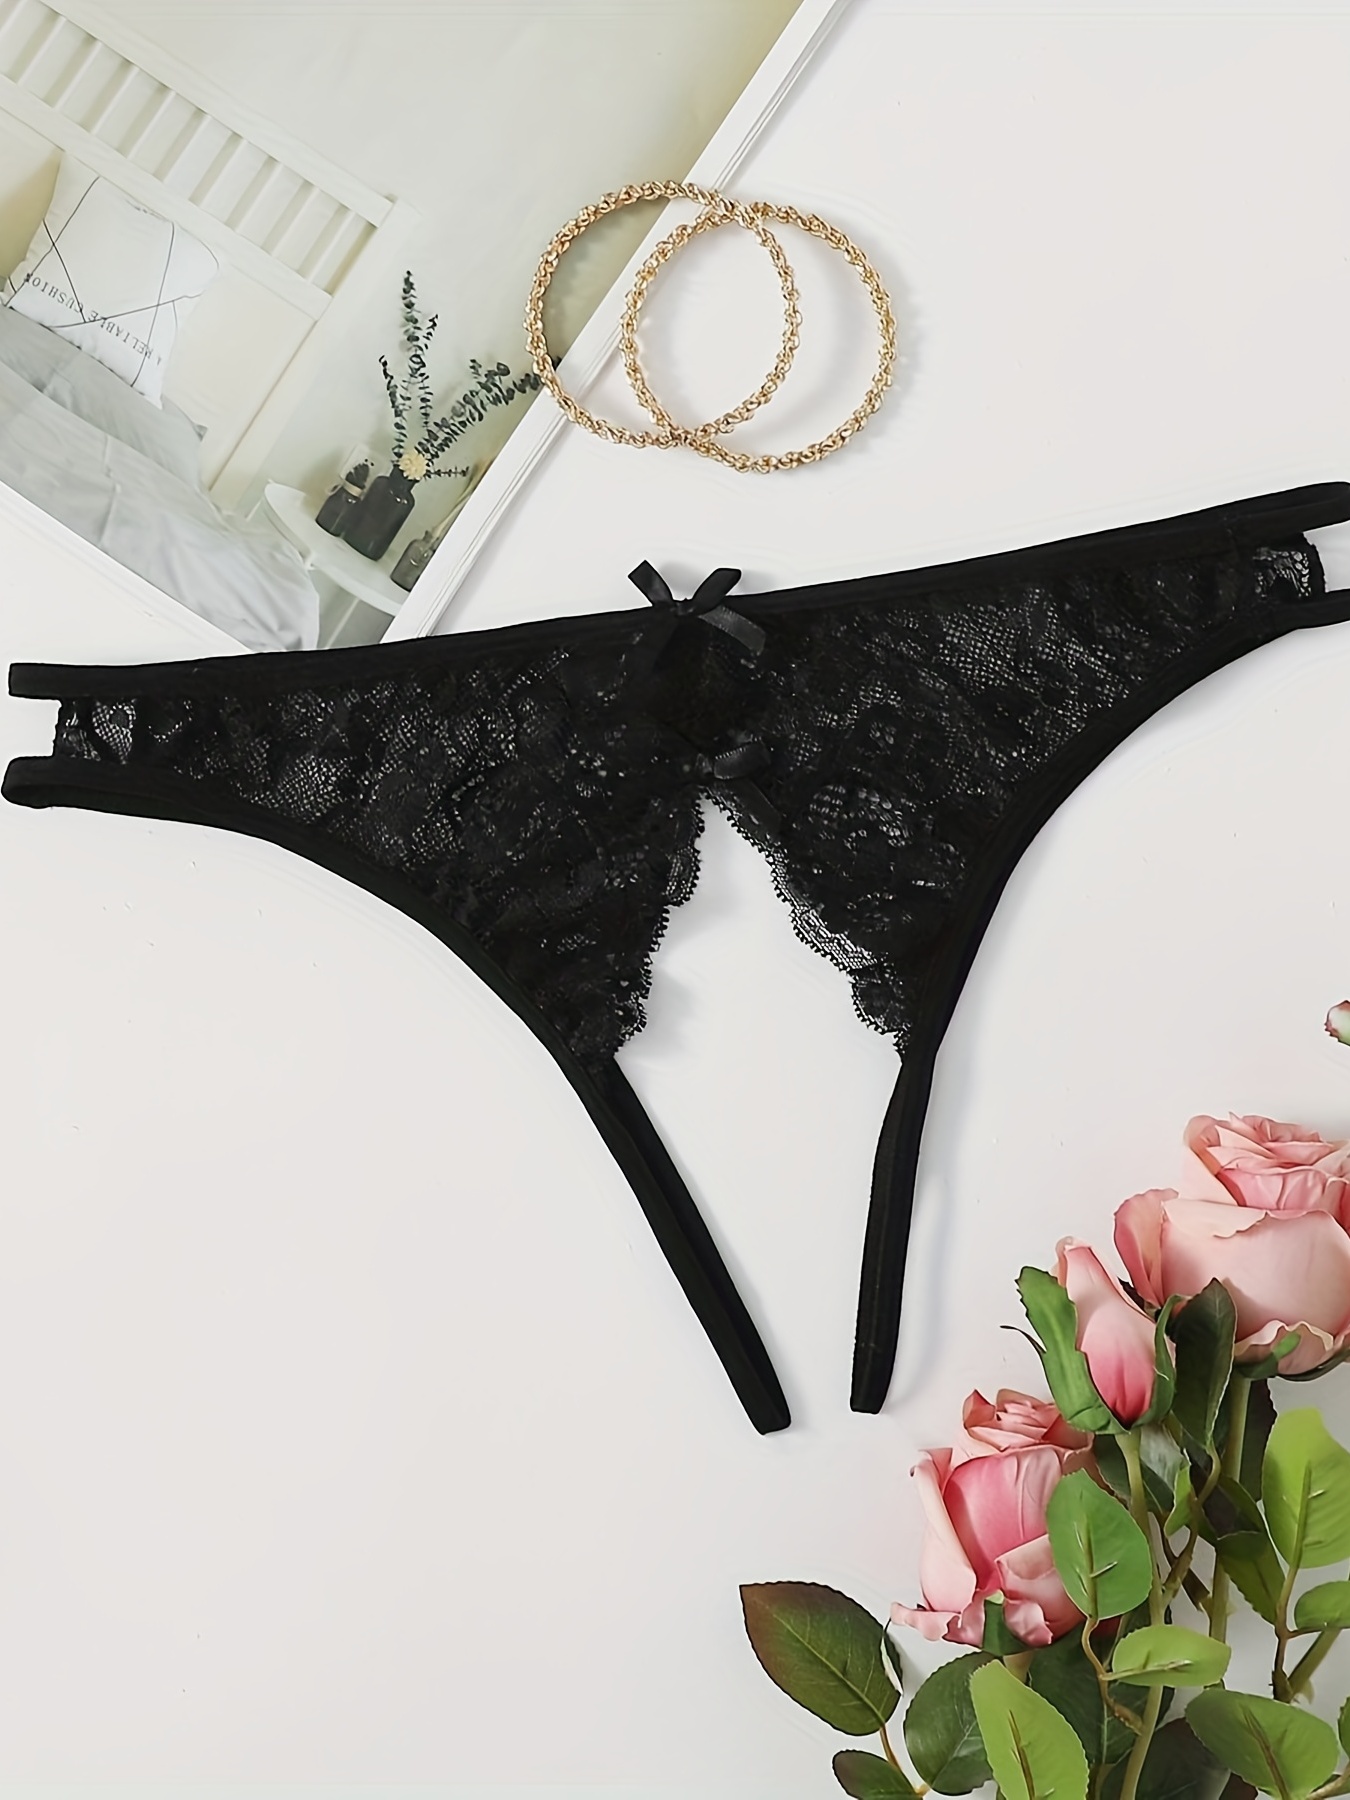 Crotchless Thongs for Women Sexy Brief Floral Lace Hipsters Side